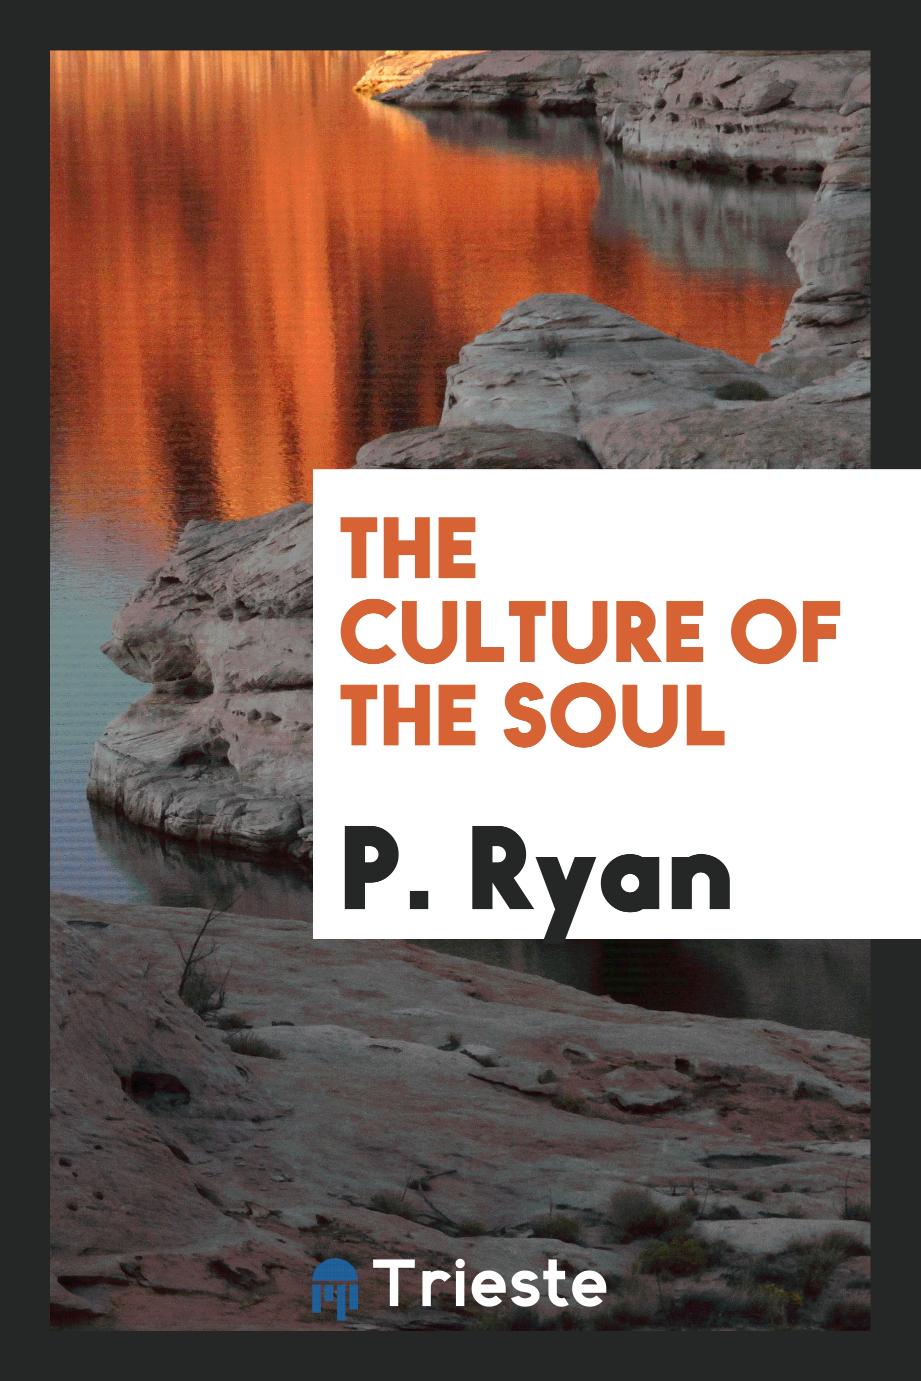 The culture of the soul